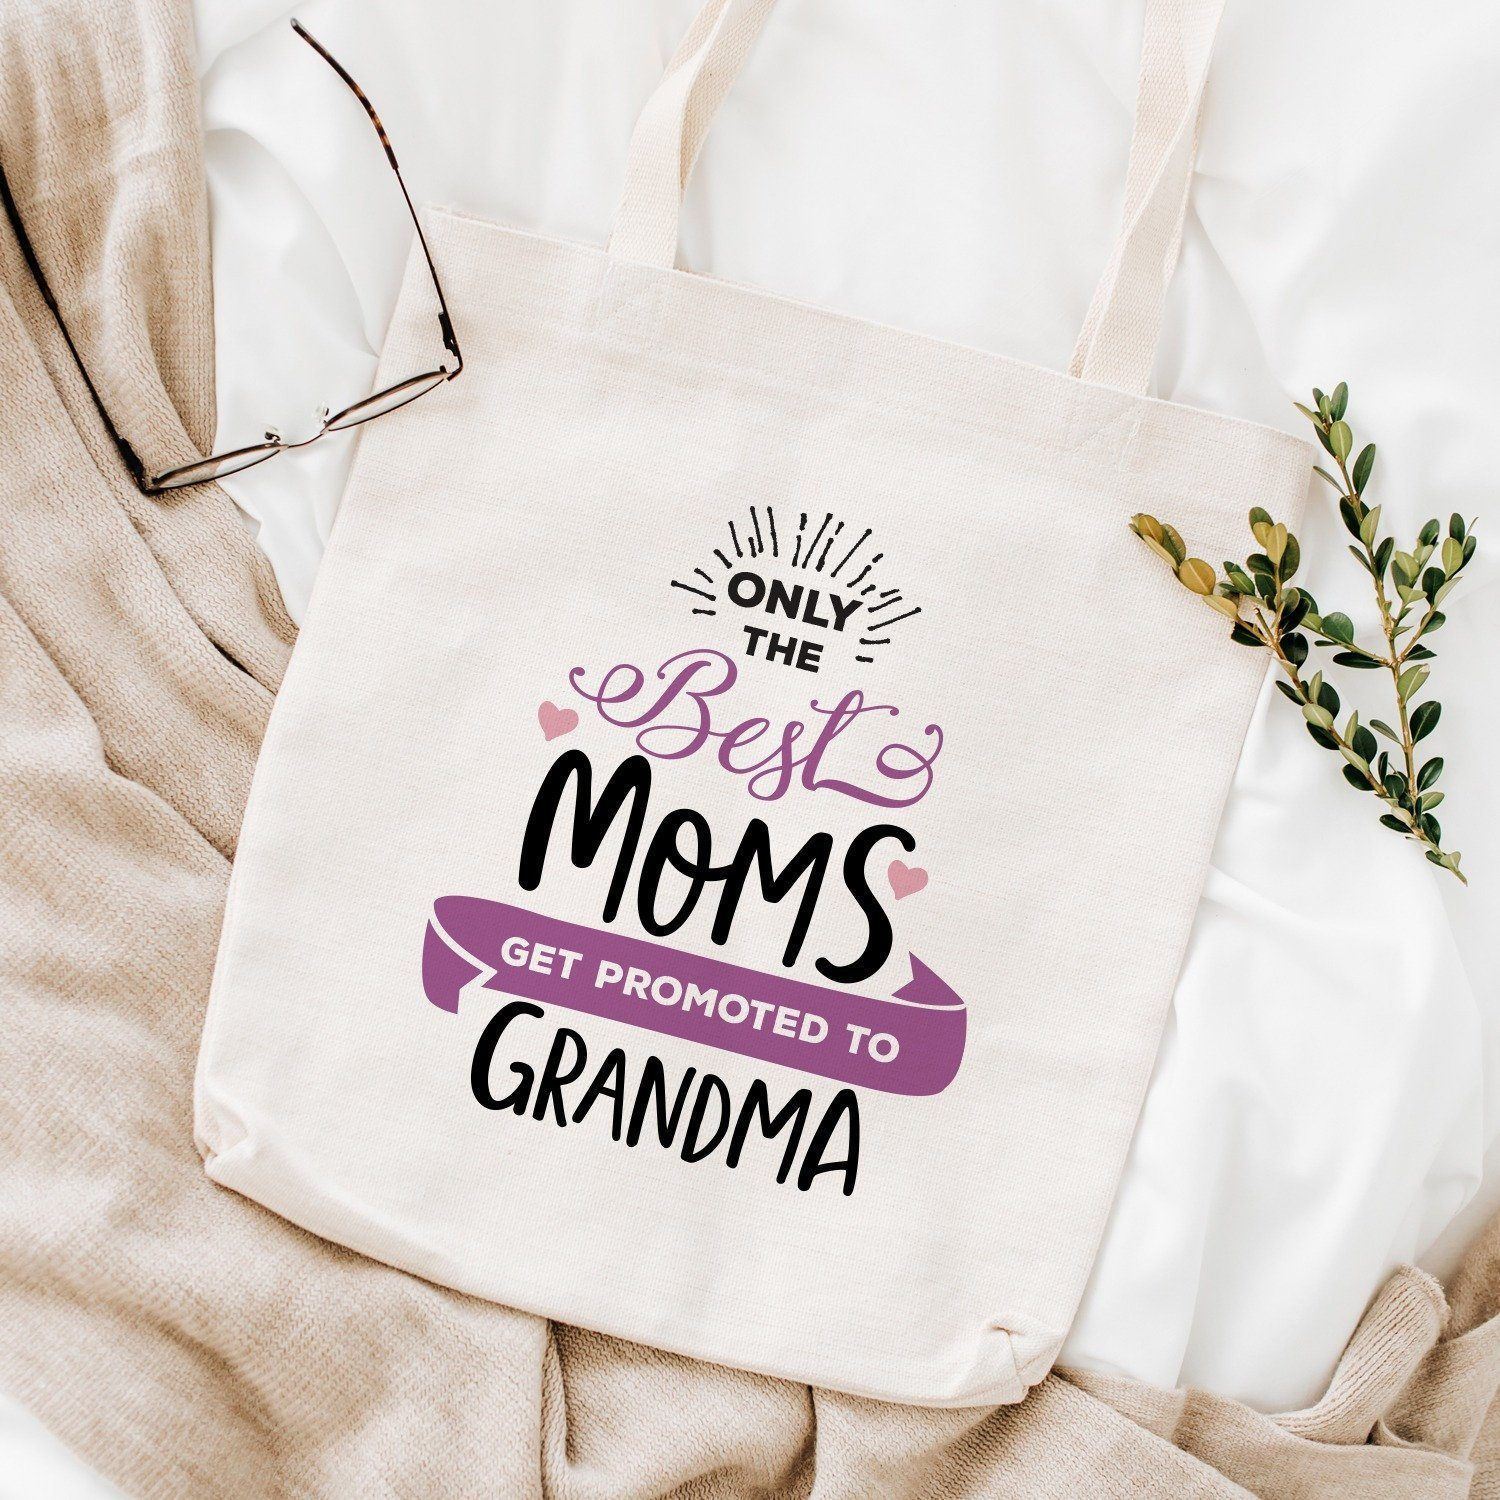 Grandma tote bag gift, Only the best moms get promoted to grandma, Shopping Bag